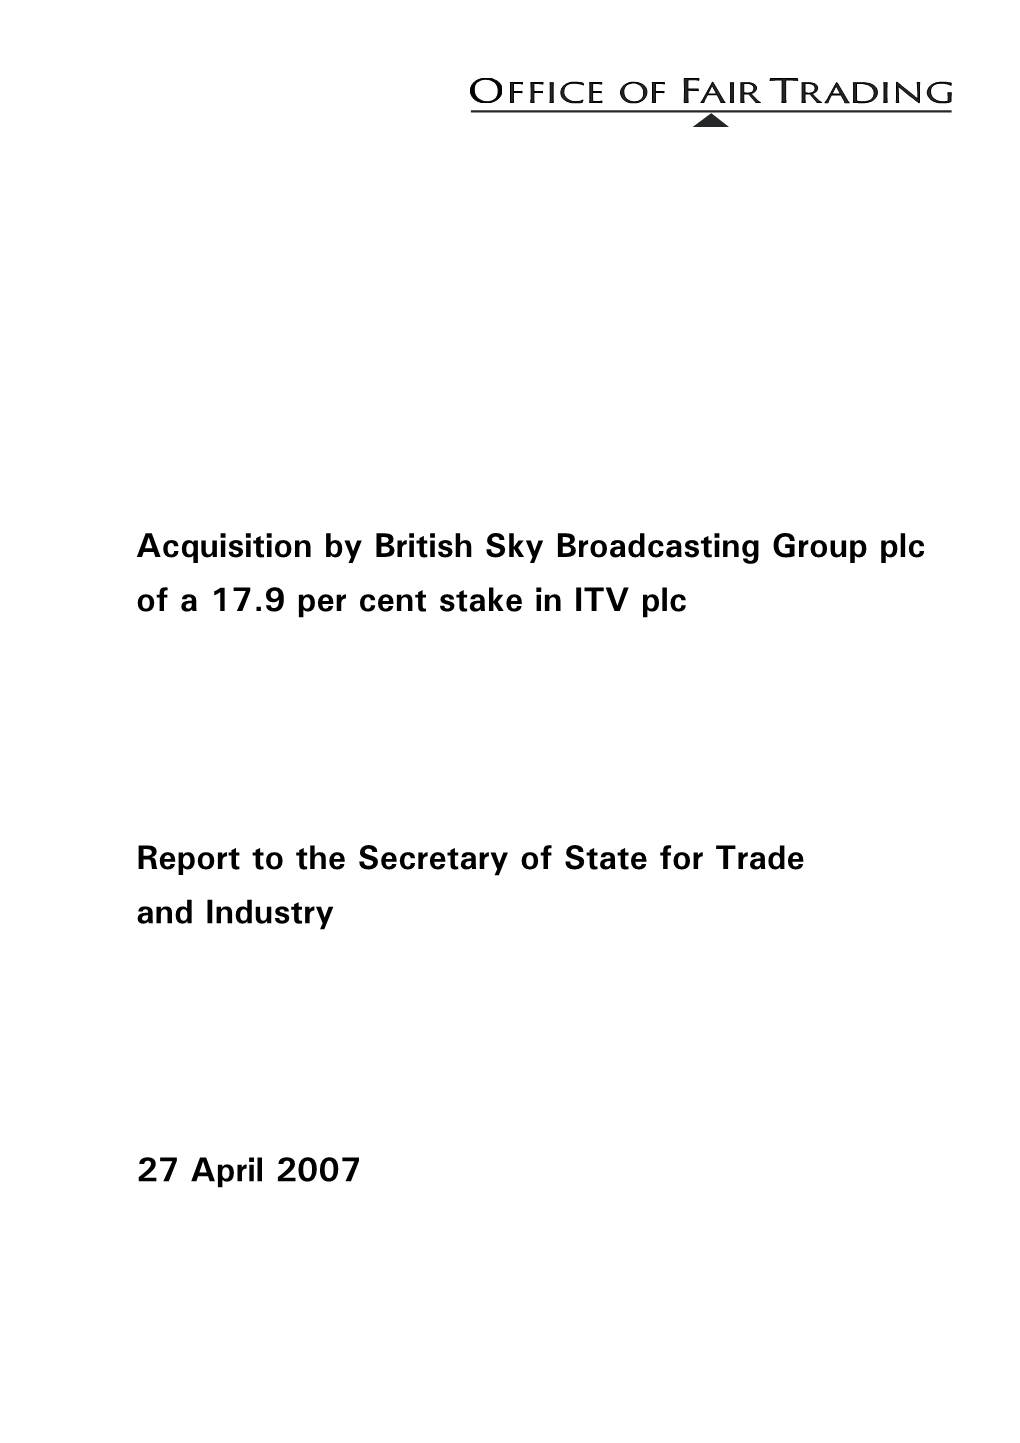 Acquisition by British Sky Broadcasting Group Plc of a 17.9 Per Cent Stake in ITV Plc